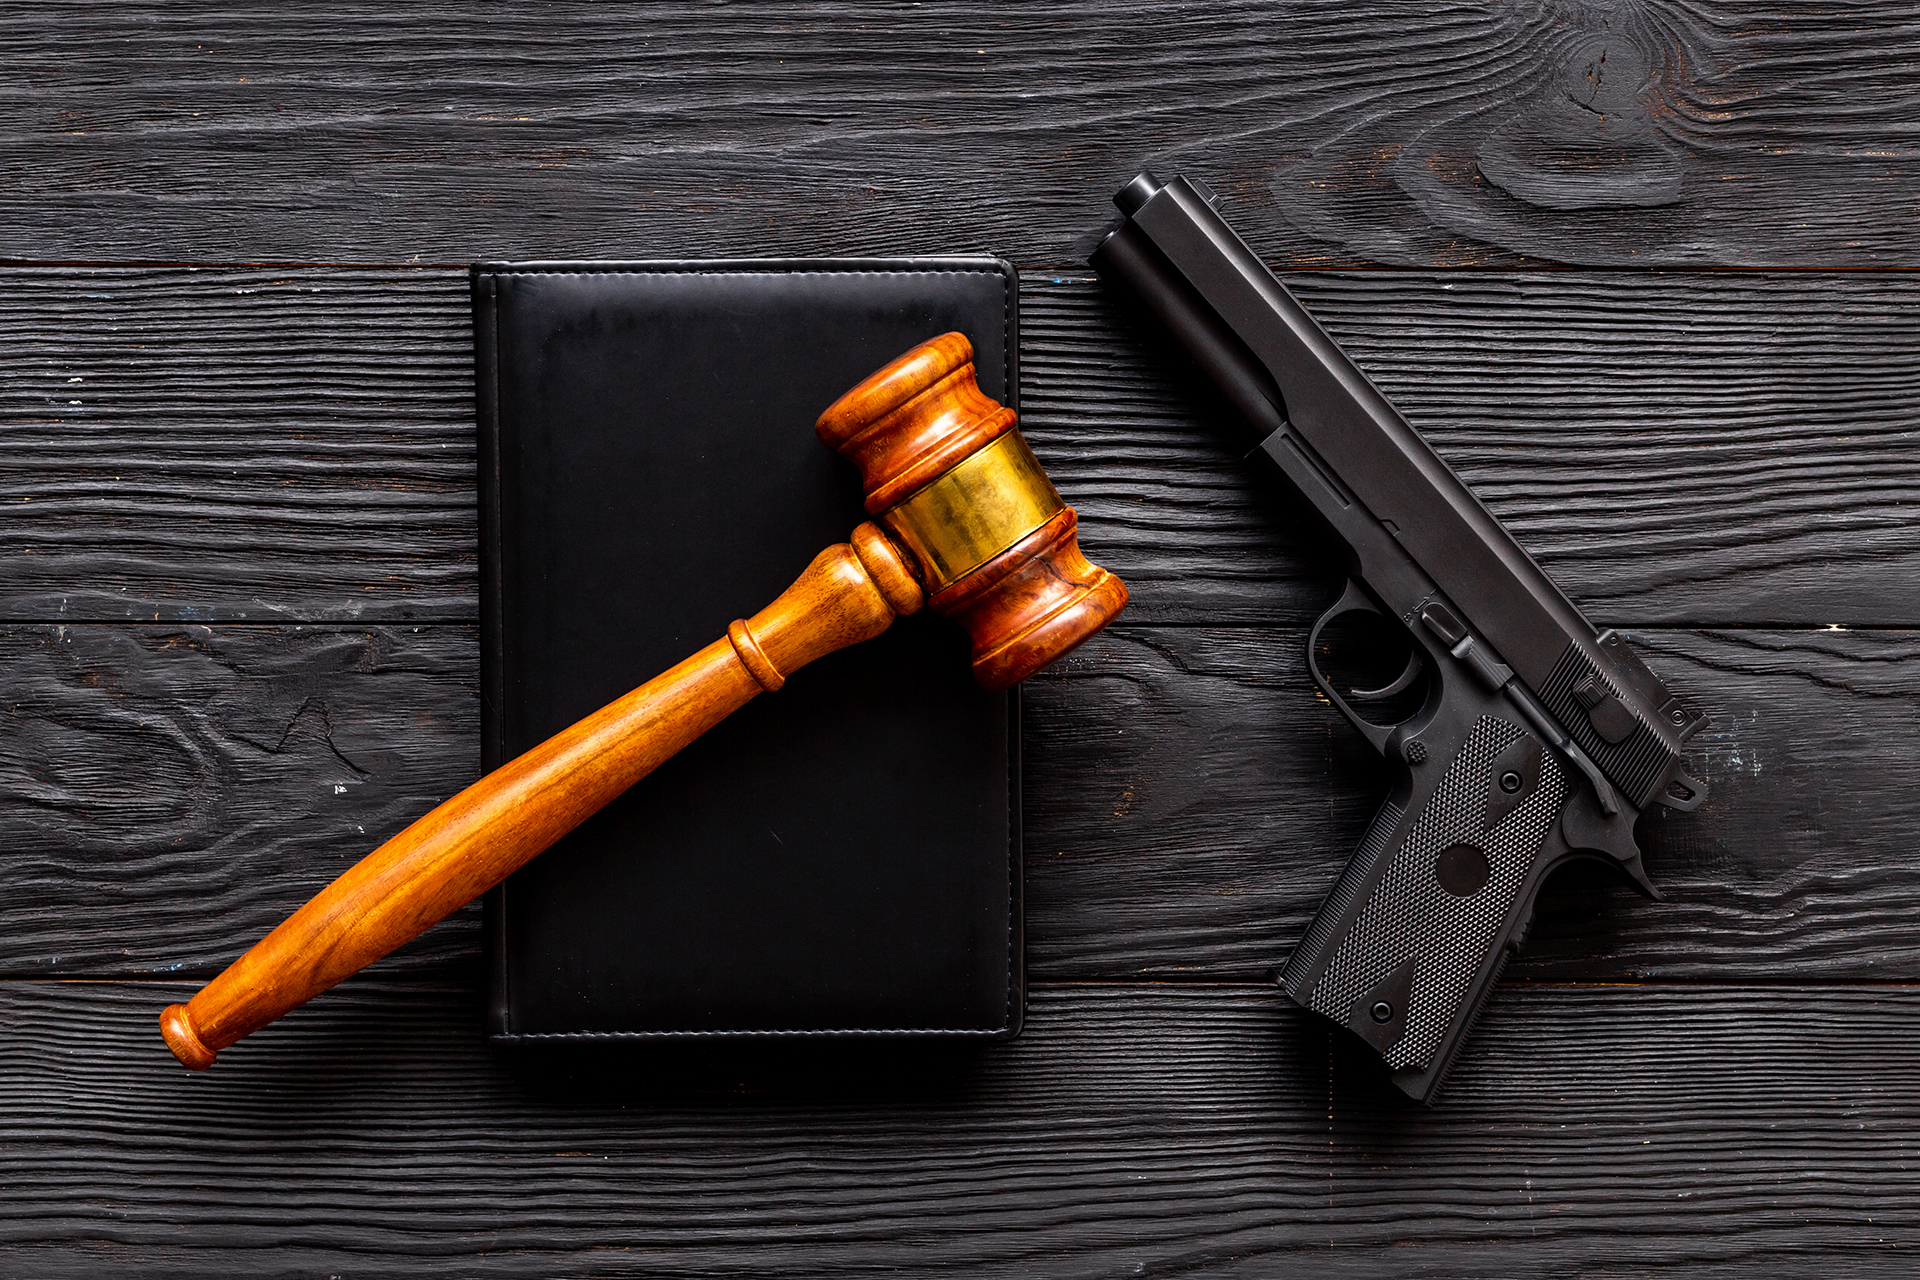 A gavel resting on a book next to a semi-automatic handgun.